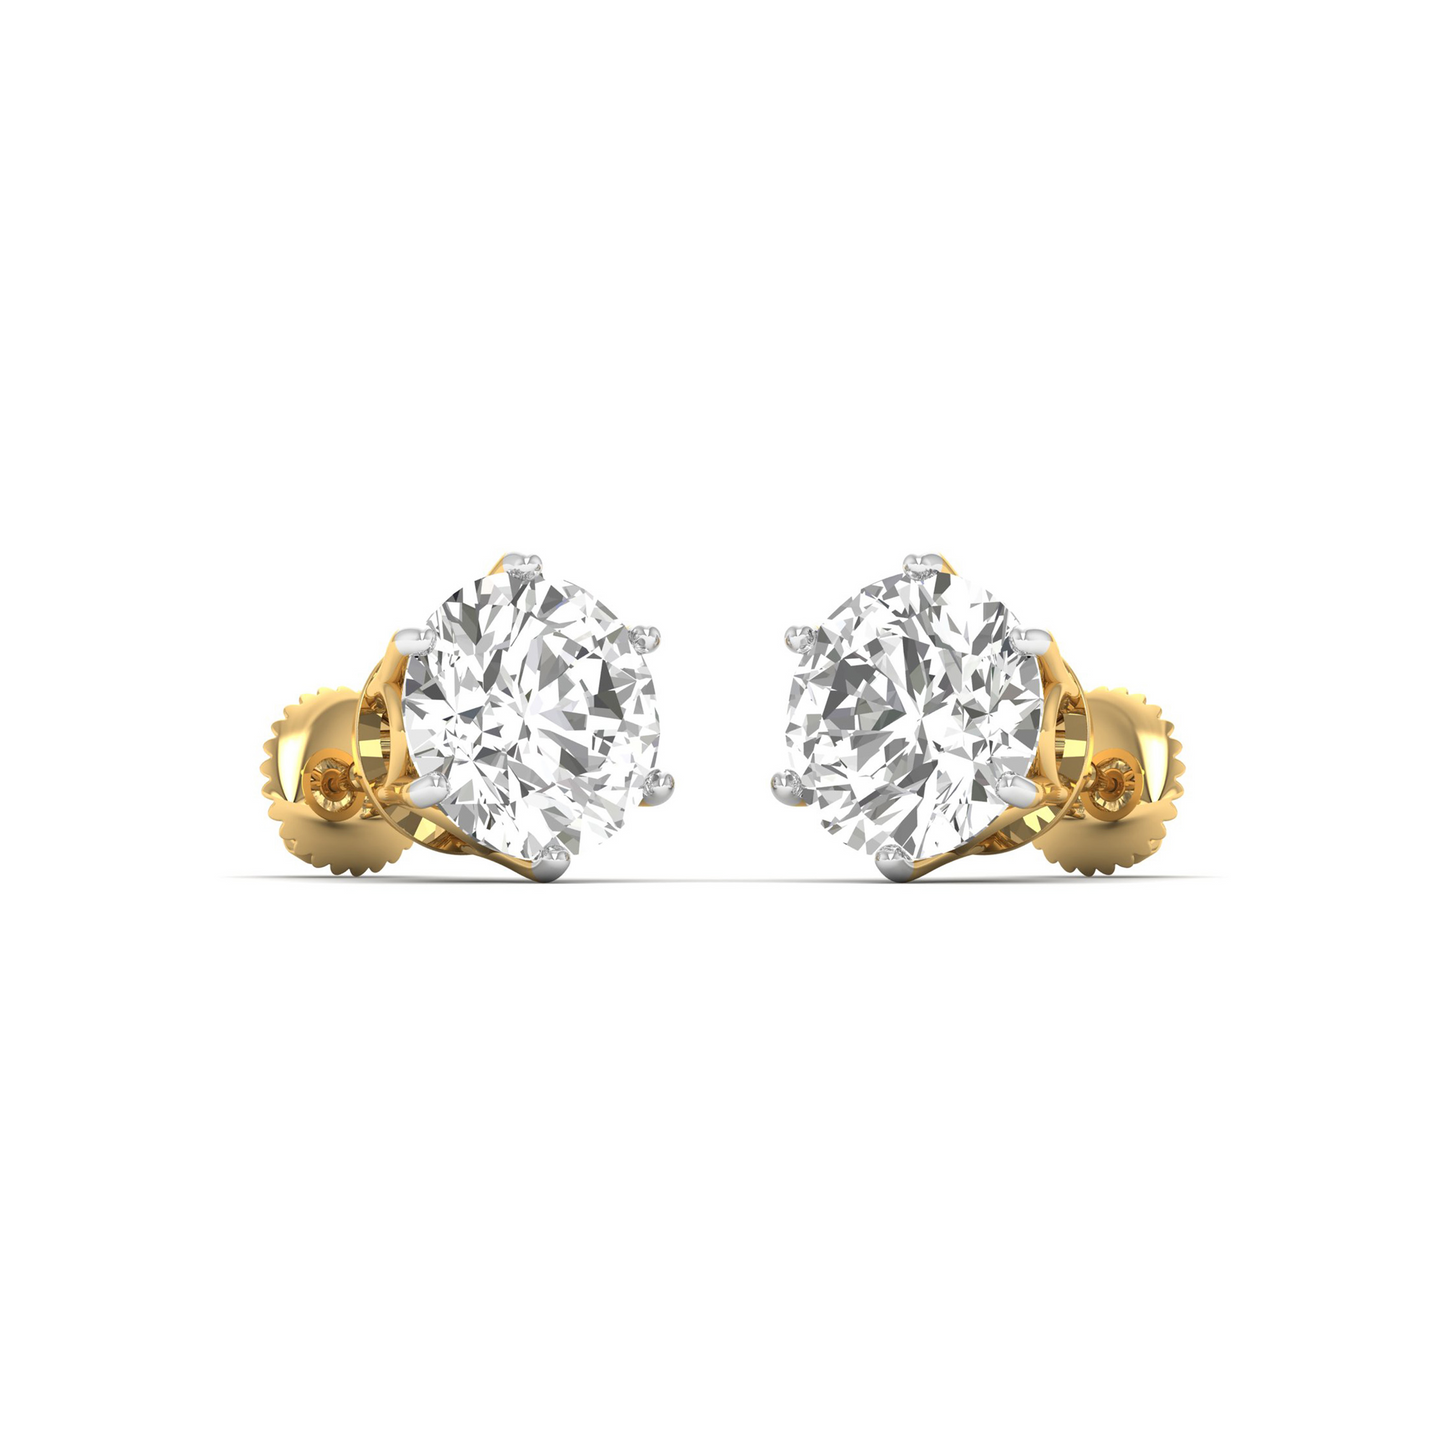 Dazzling Circles of Luxury: Round-Cut Diamond Earrings for Effortless Glamour